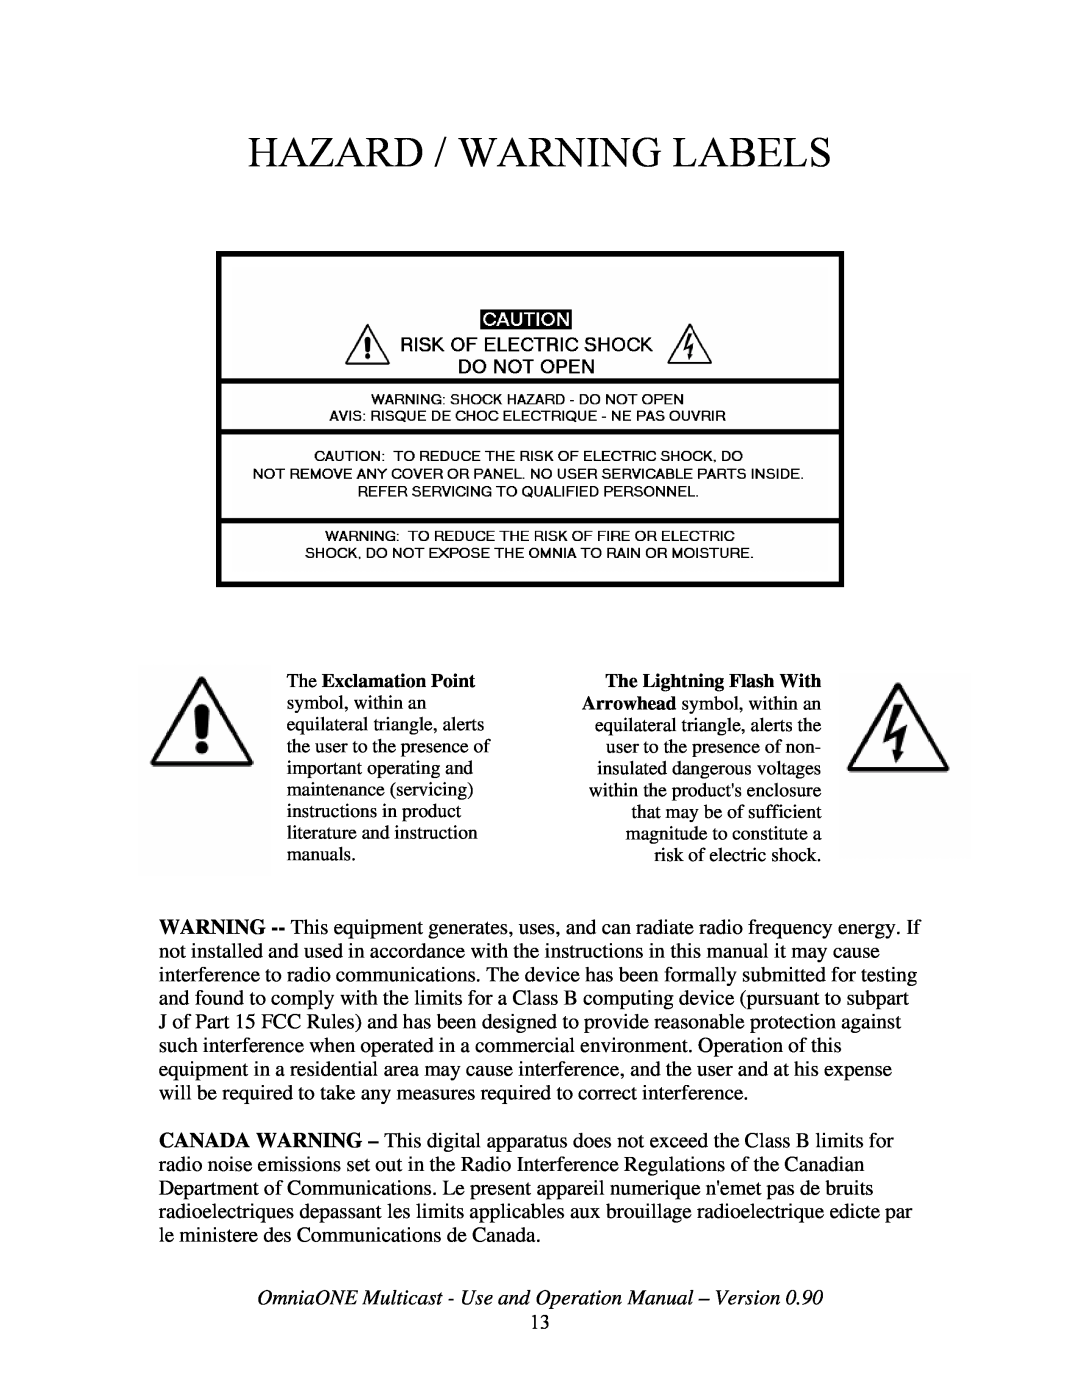 New Media Technology Omnia ONE Multicast Hazard / Warning Labels, OmniaONE Multicast - Use and Operation Manual - Version 